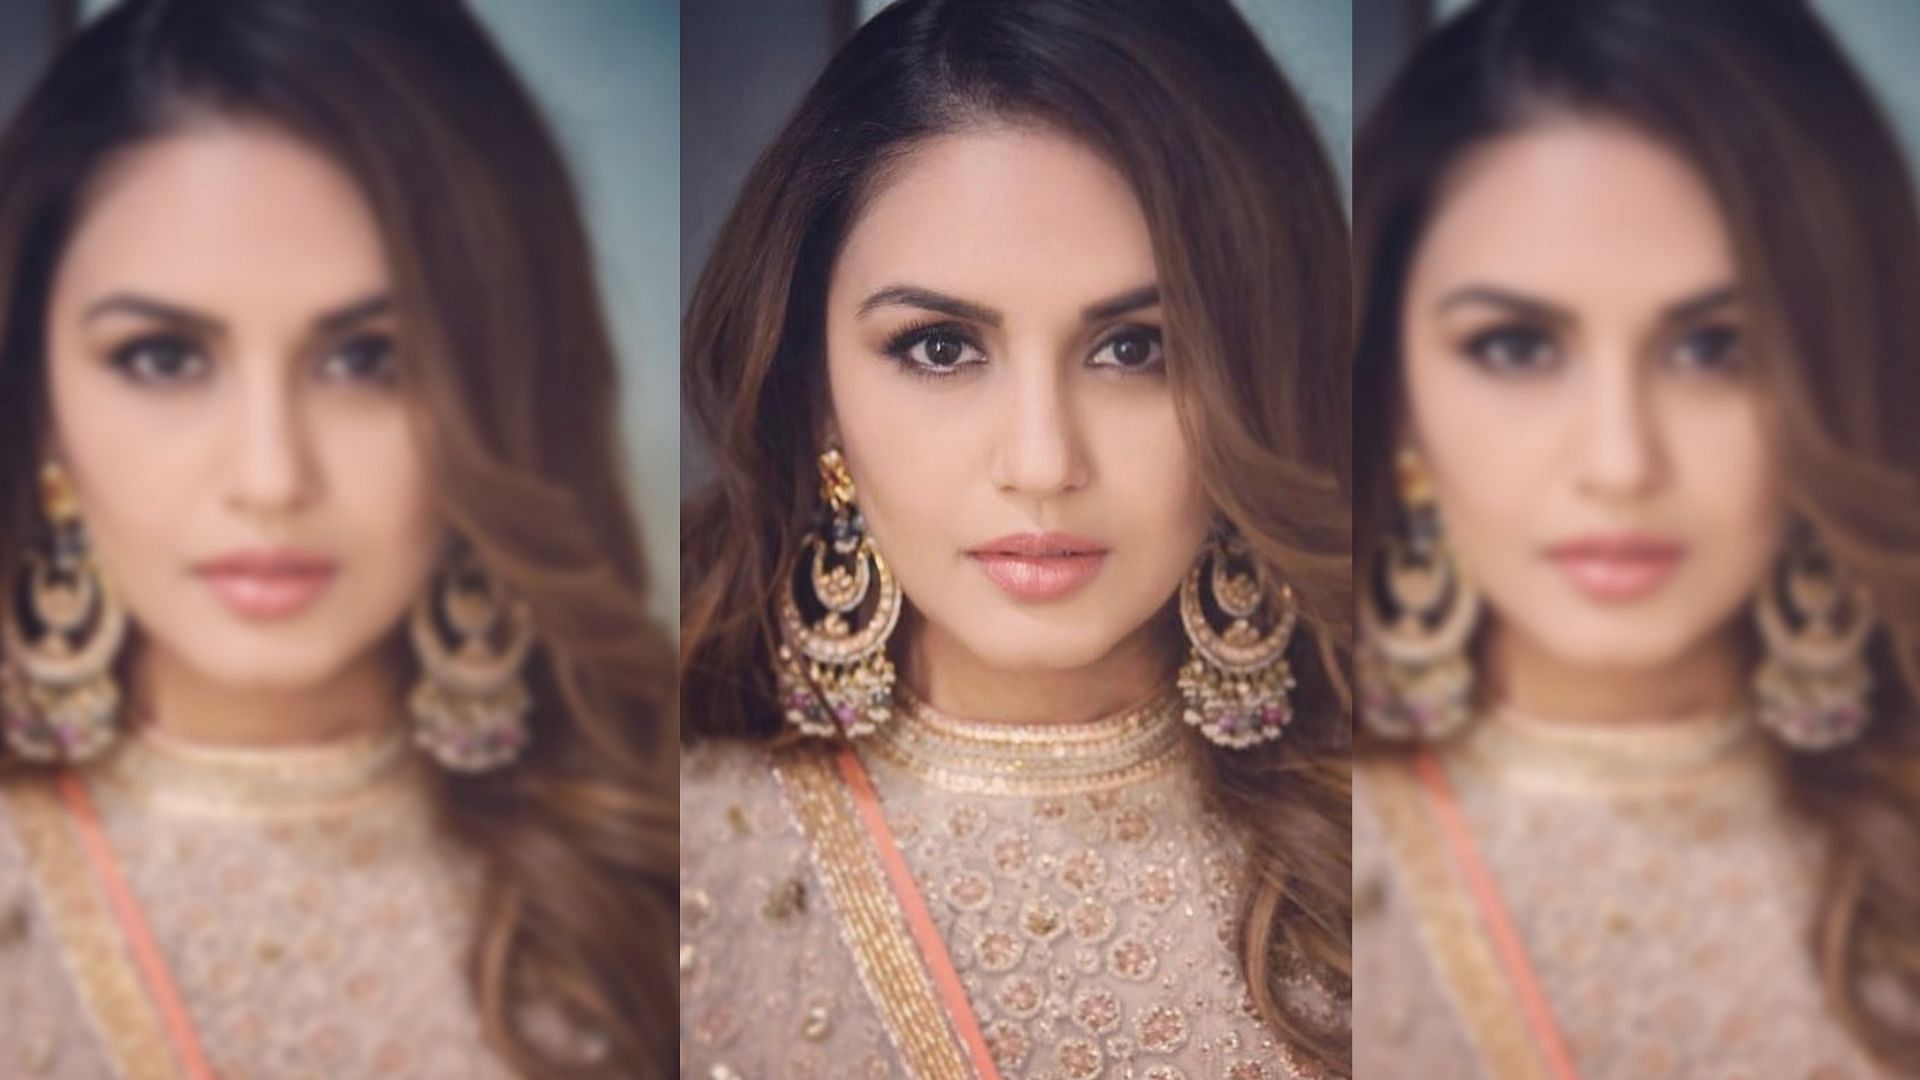 Huma Qureshi asks people to be sensitive about the situation in Kashmir.